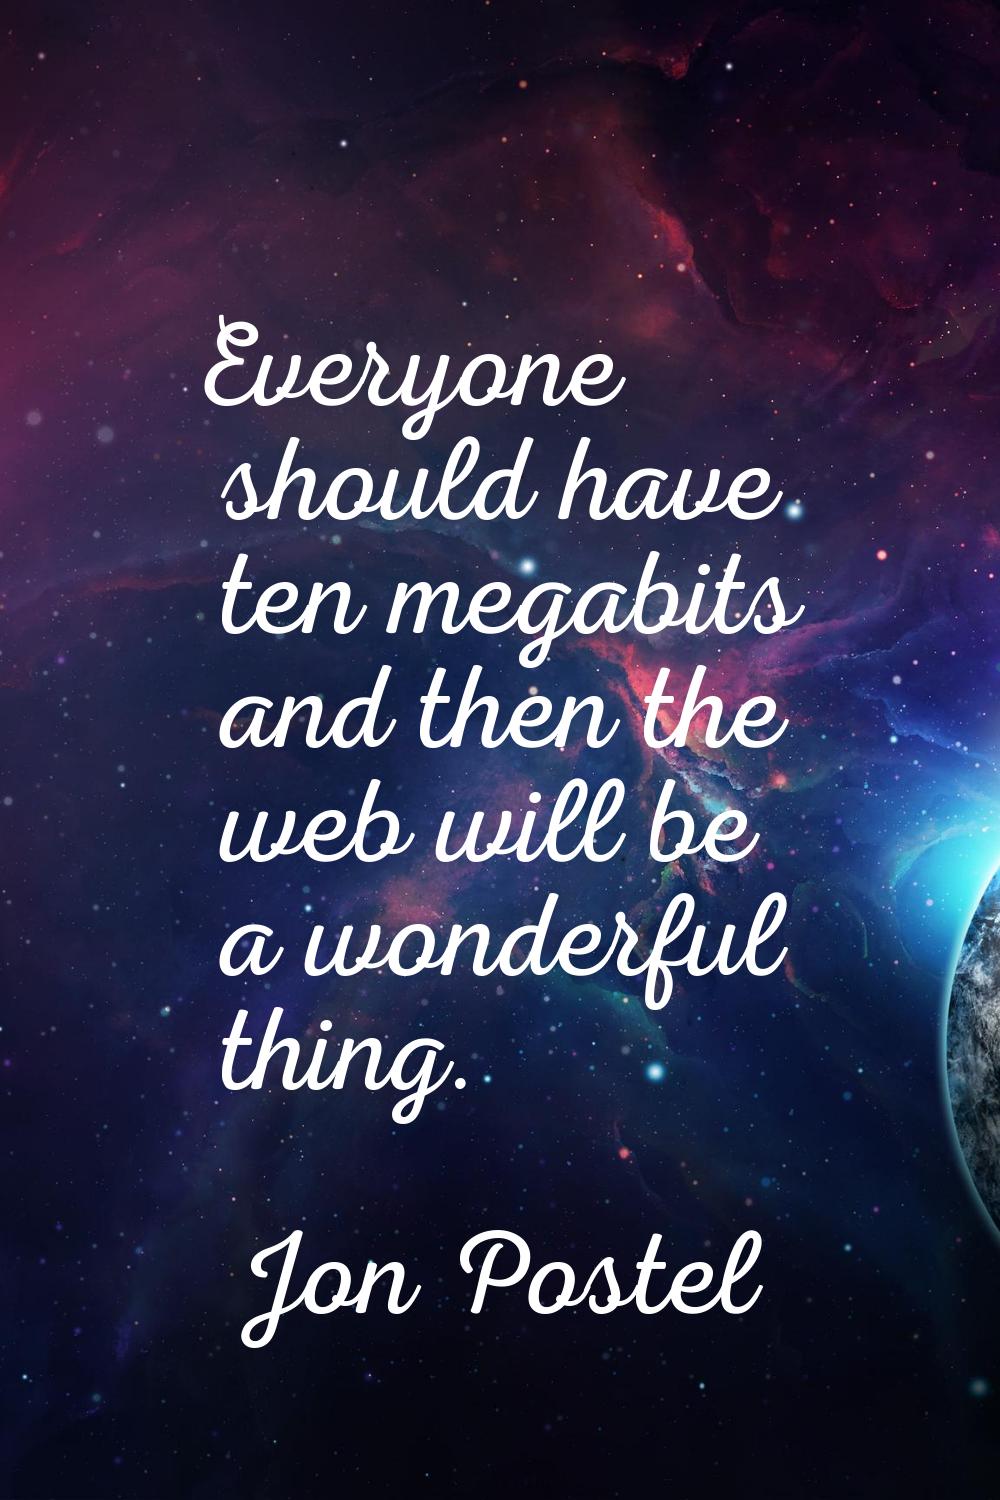 Everyone should have ten megabits and then the web will be a wonderful thing.